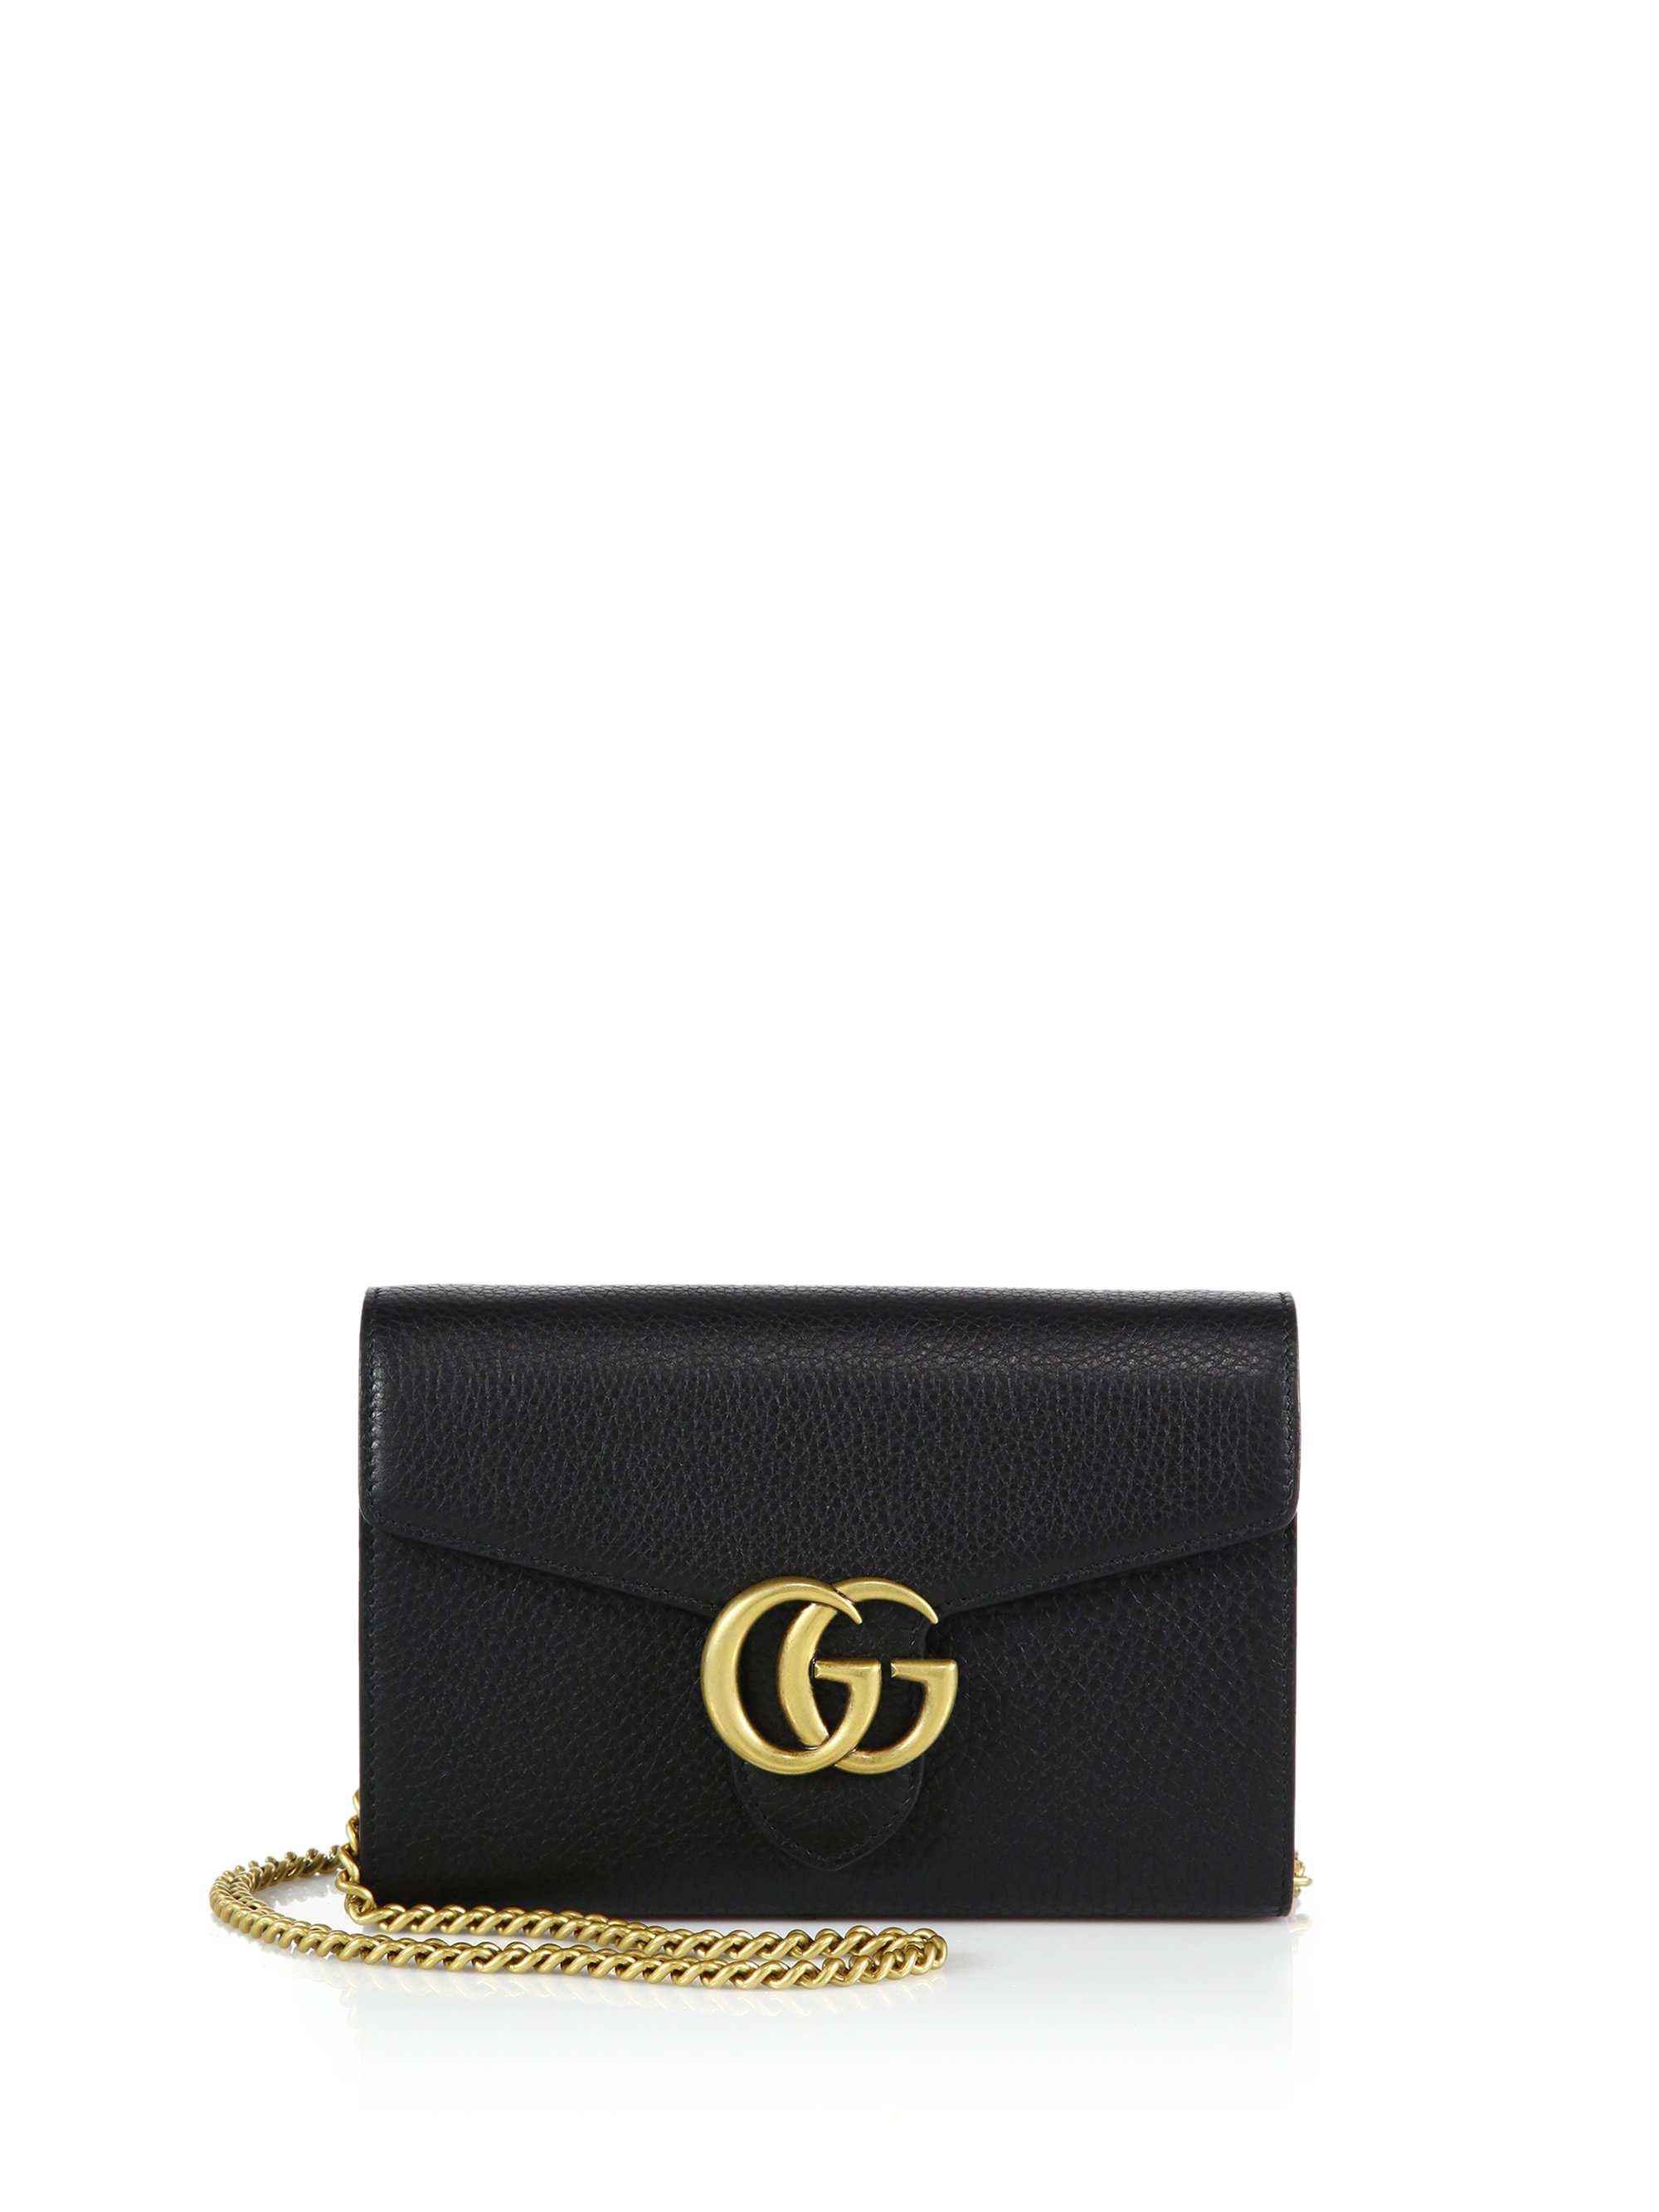 Gucci GG Marmont Leather Chain Strap Wallet Bag in Black | Lyst